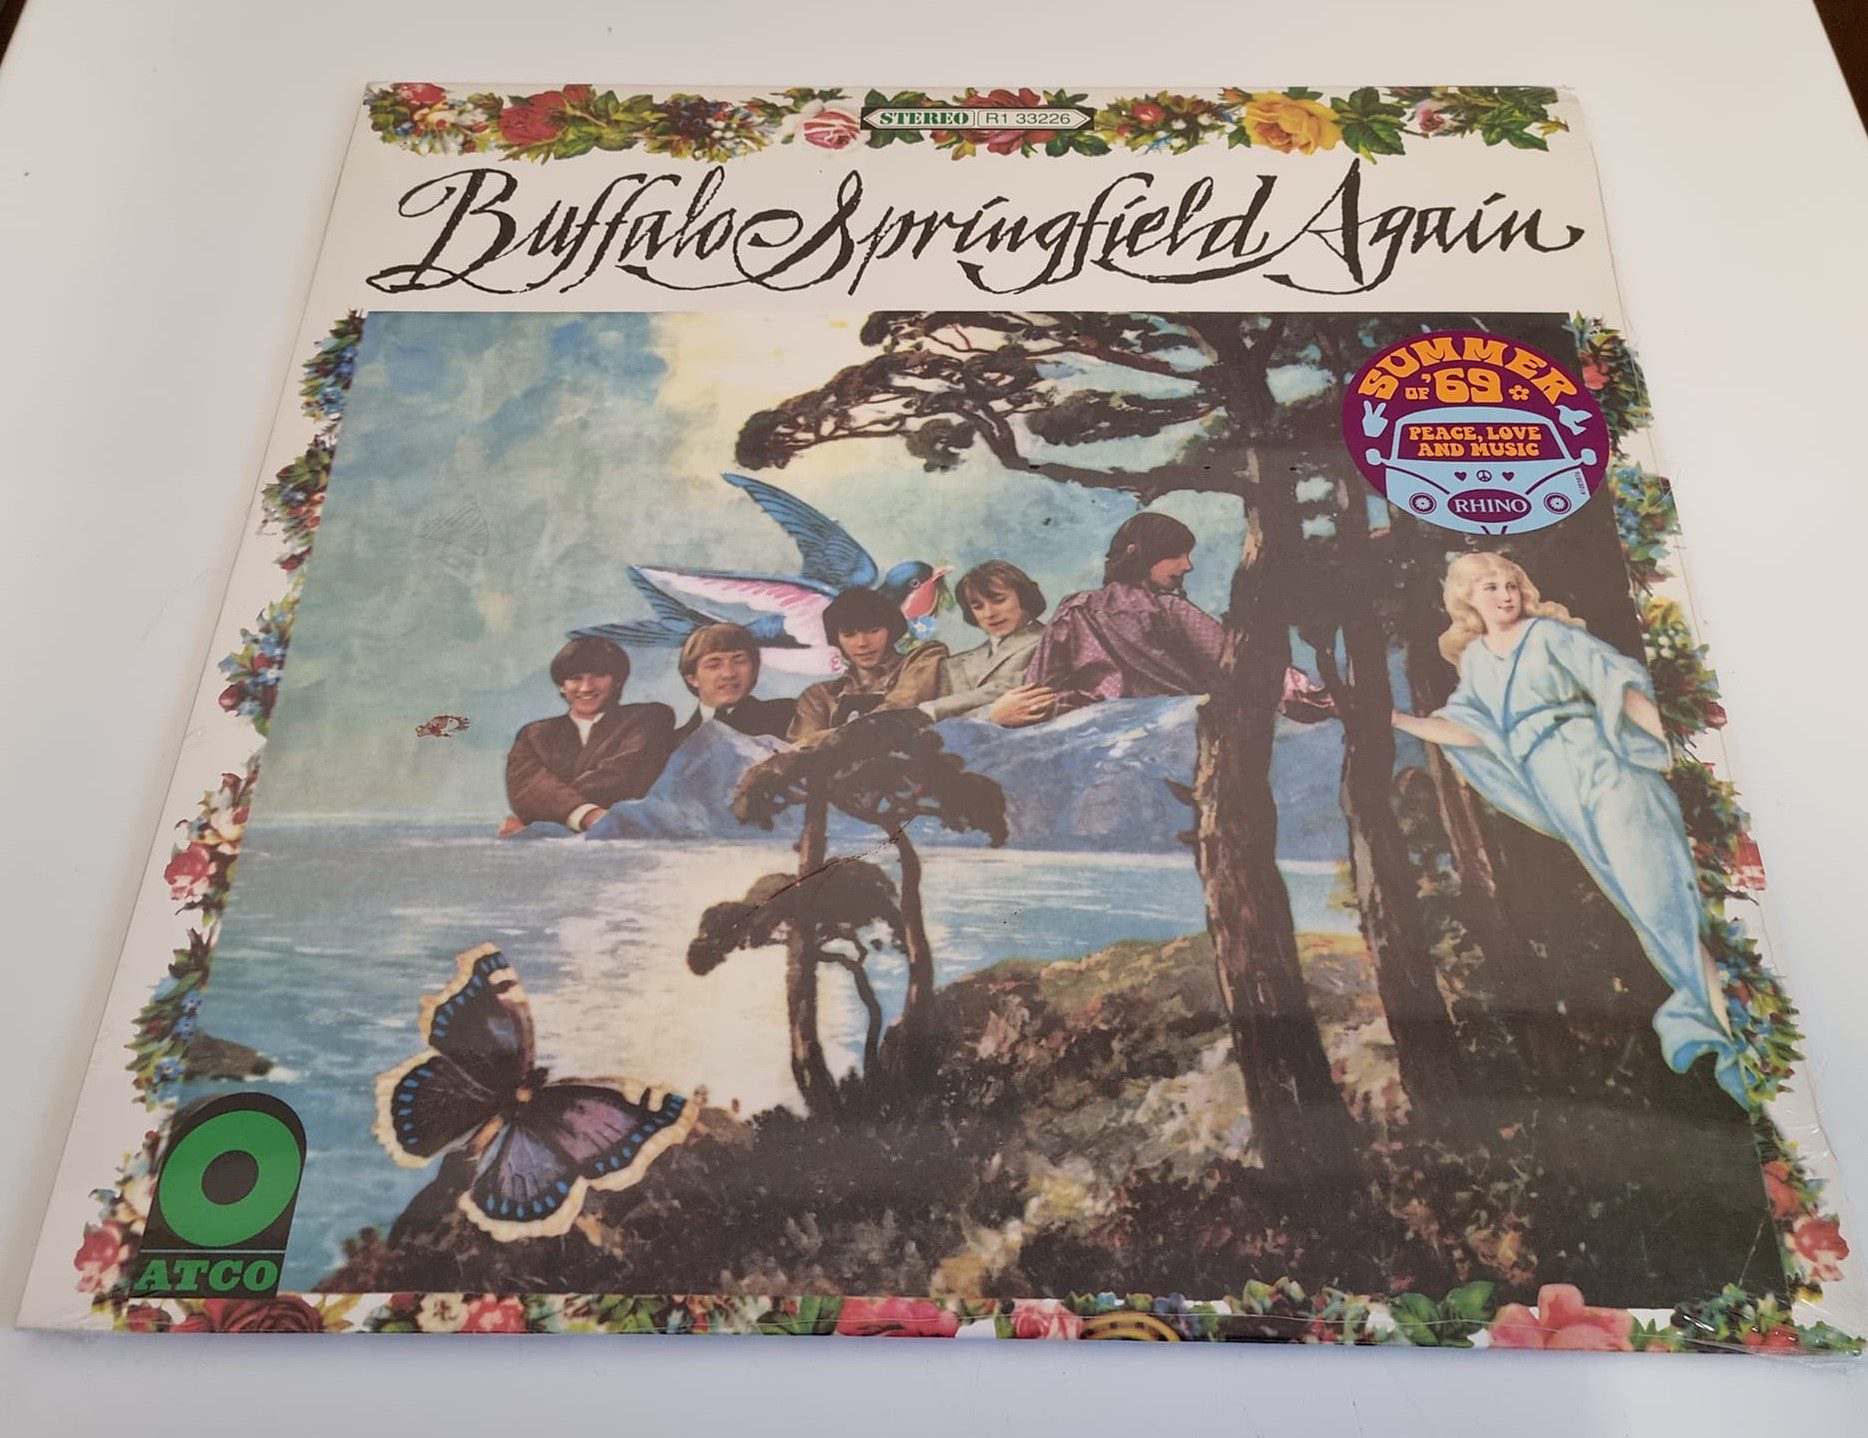 Buy this rare Buffalo Springfield record by clicking here